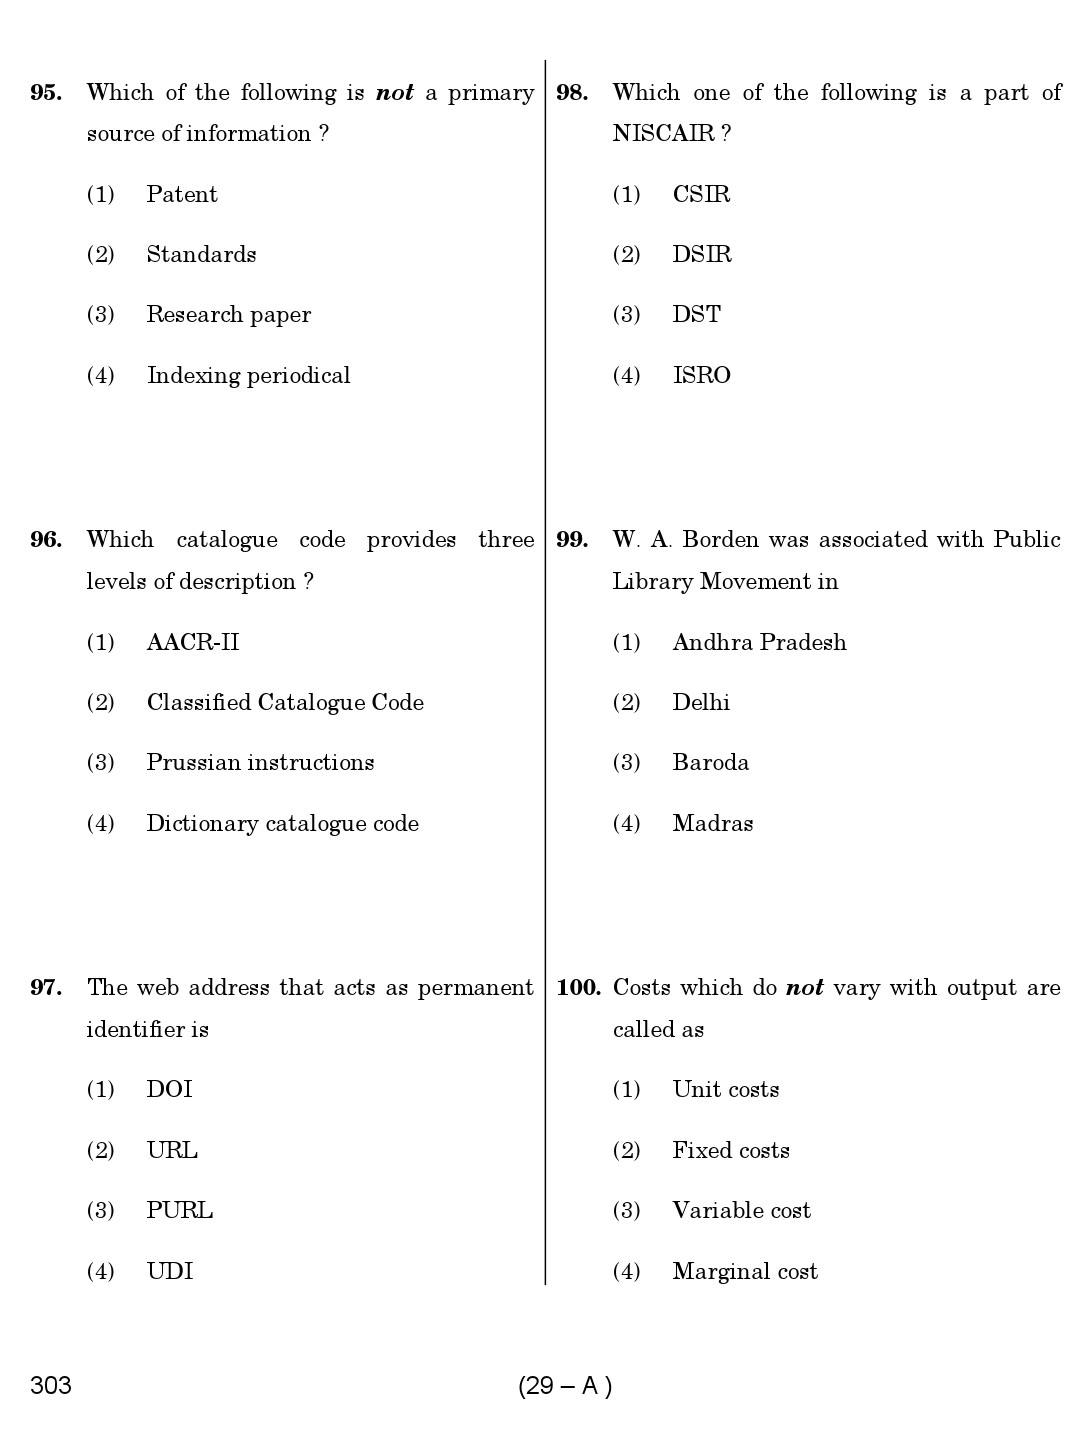 Karnataka PSC 303 Specific Paper II Librarian Exam Sample Question Paper 29